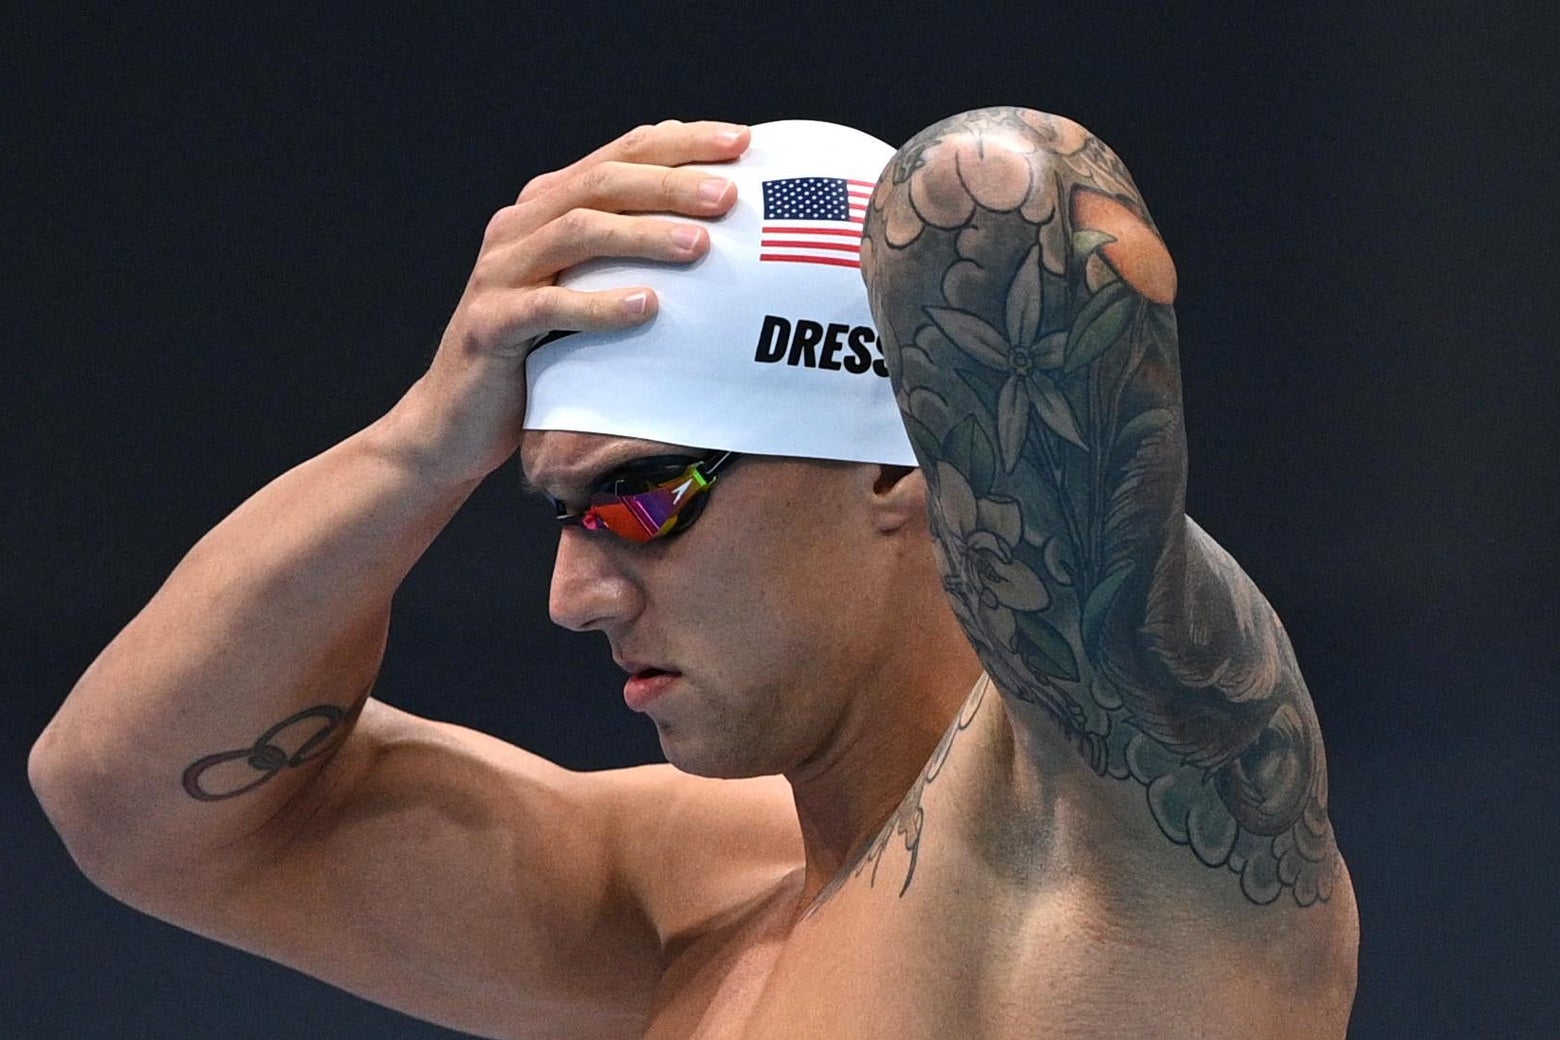 Olympic gold medal angel tattoo located on Devin